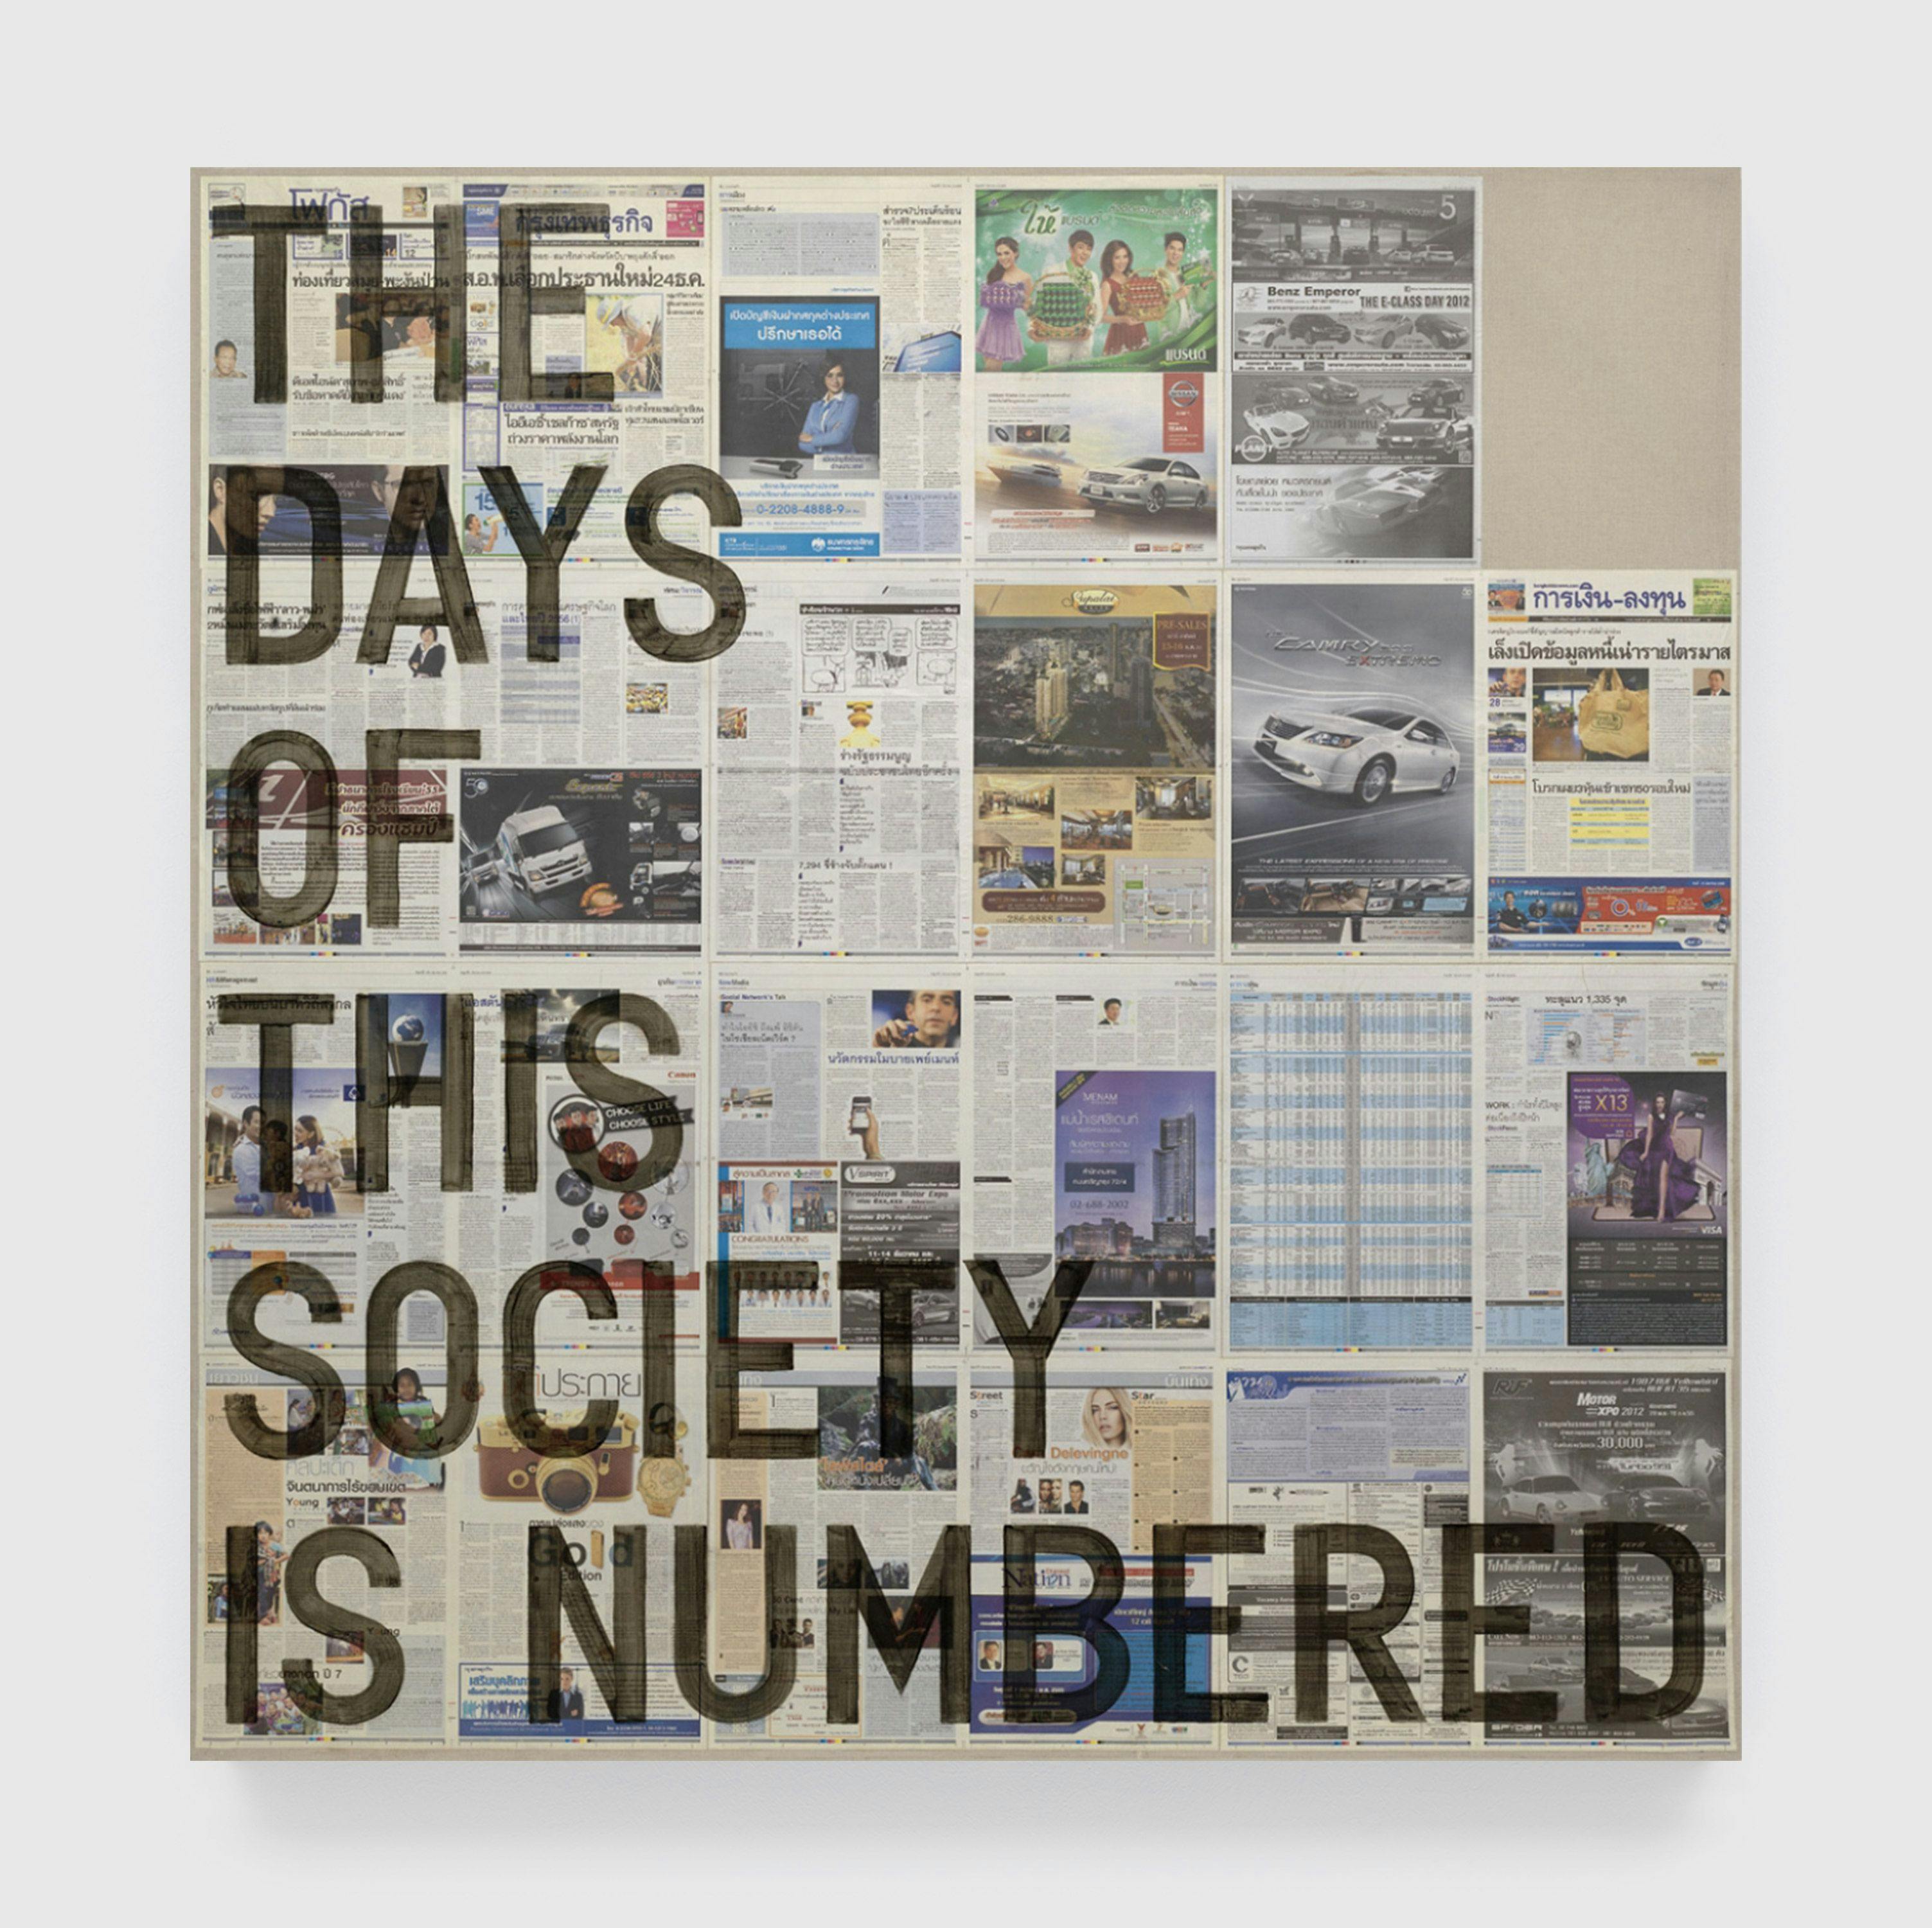 A painting by Rirkrit Tiravanija, called Untitled (the days of this society is numbered / December 7, 2012), dated 2014.